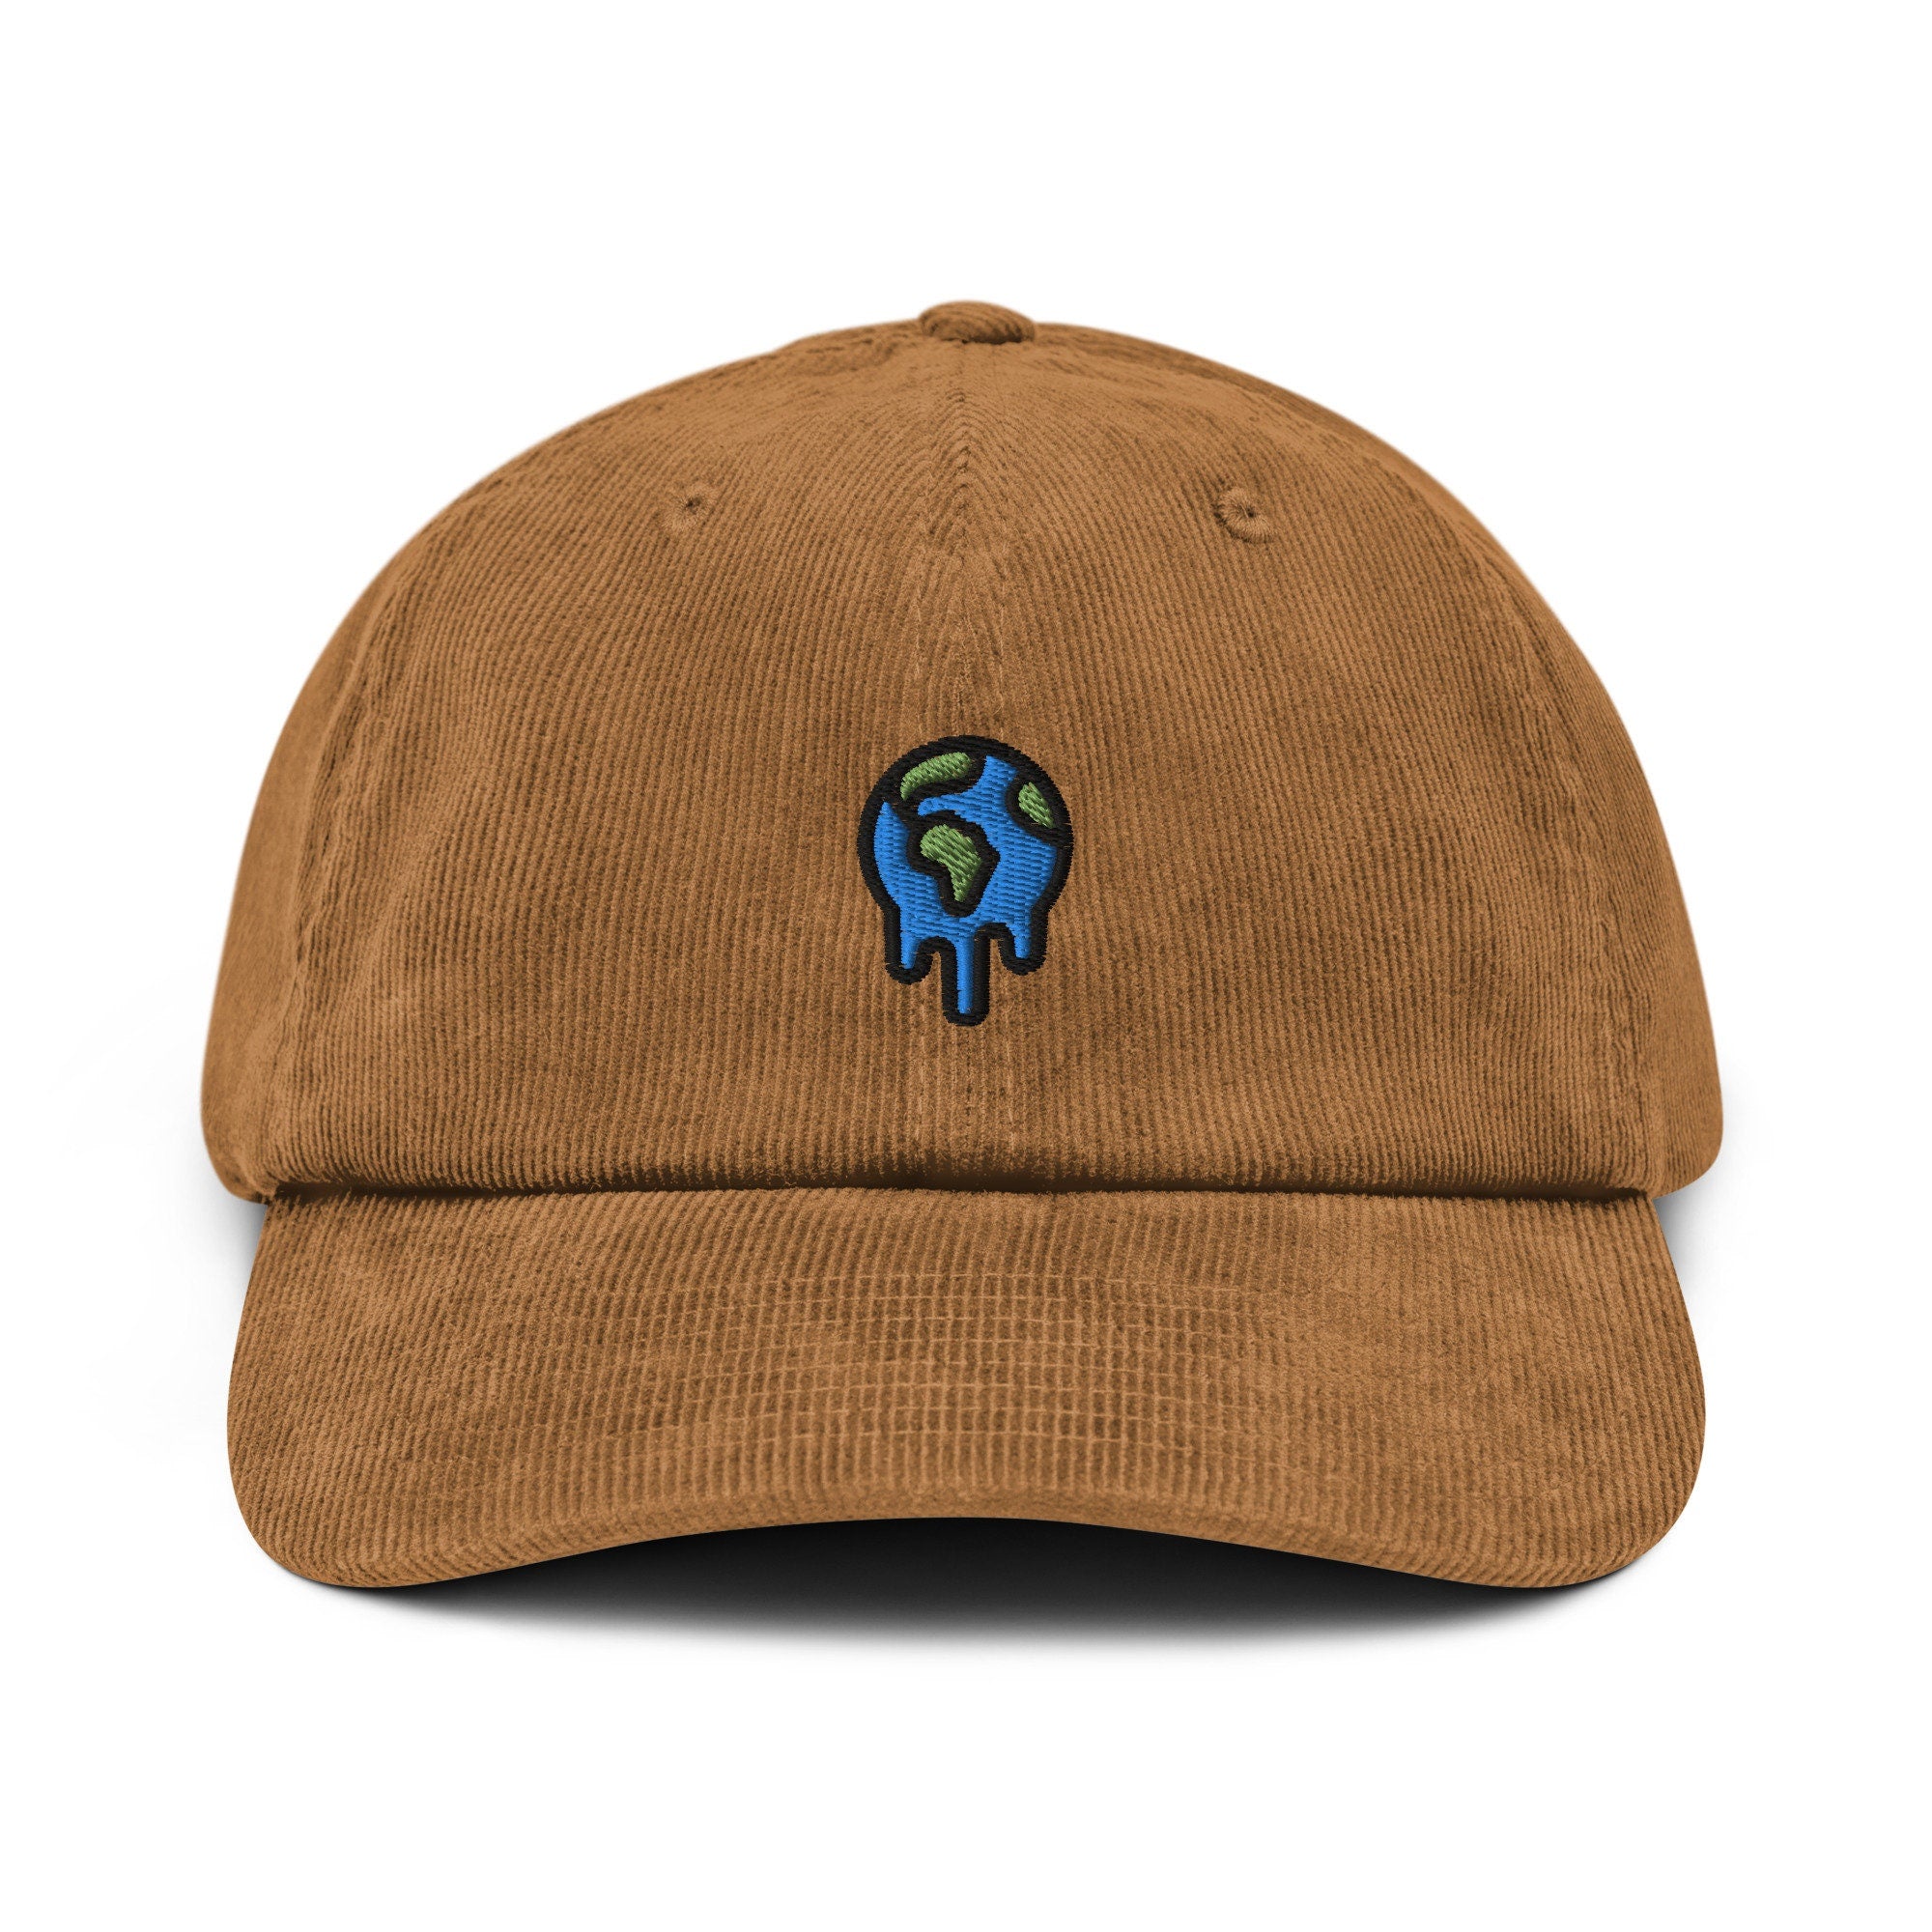 Global Warming Corduroy Hat, Handmade Embroidered Corduroy Dad Cap - Multiple Colors